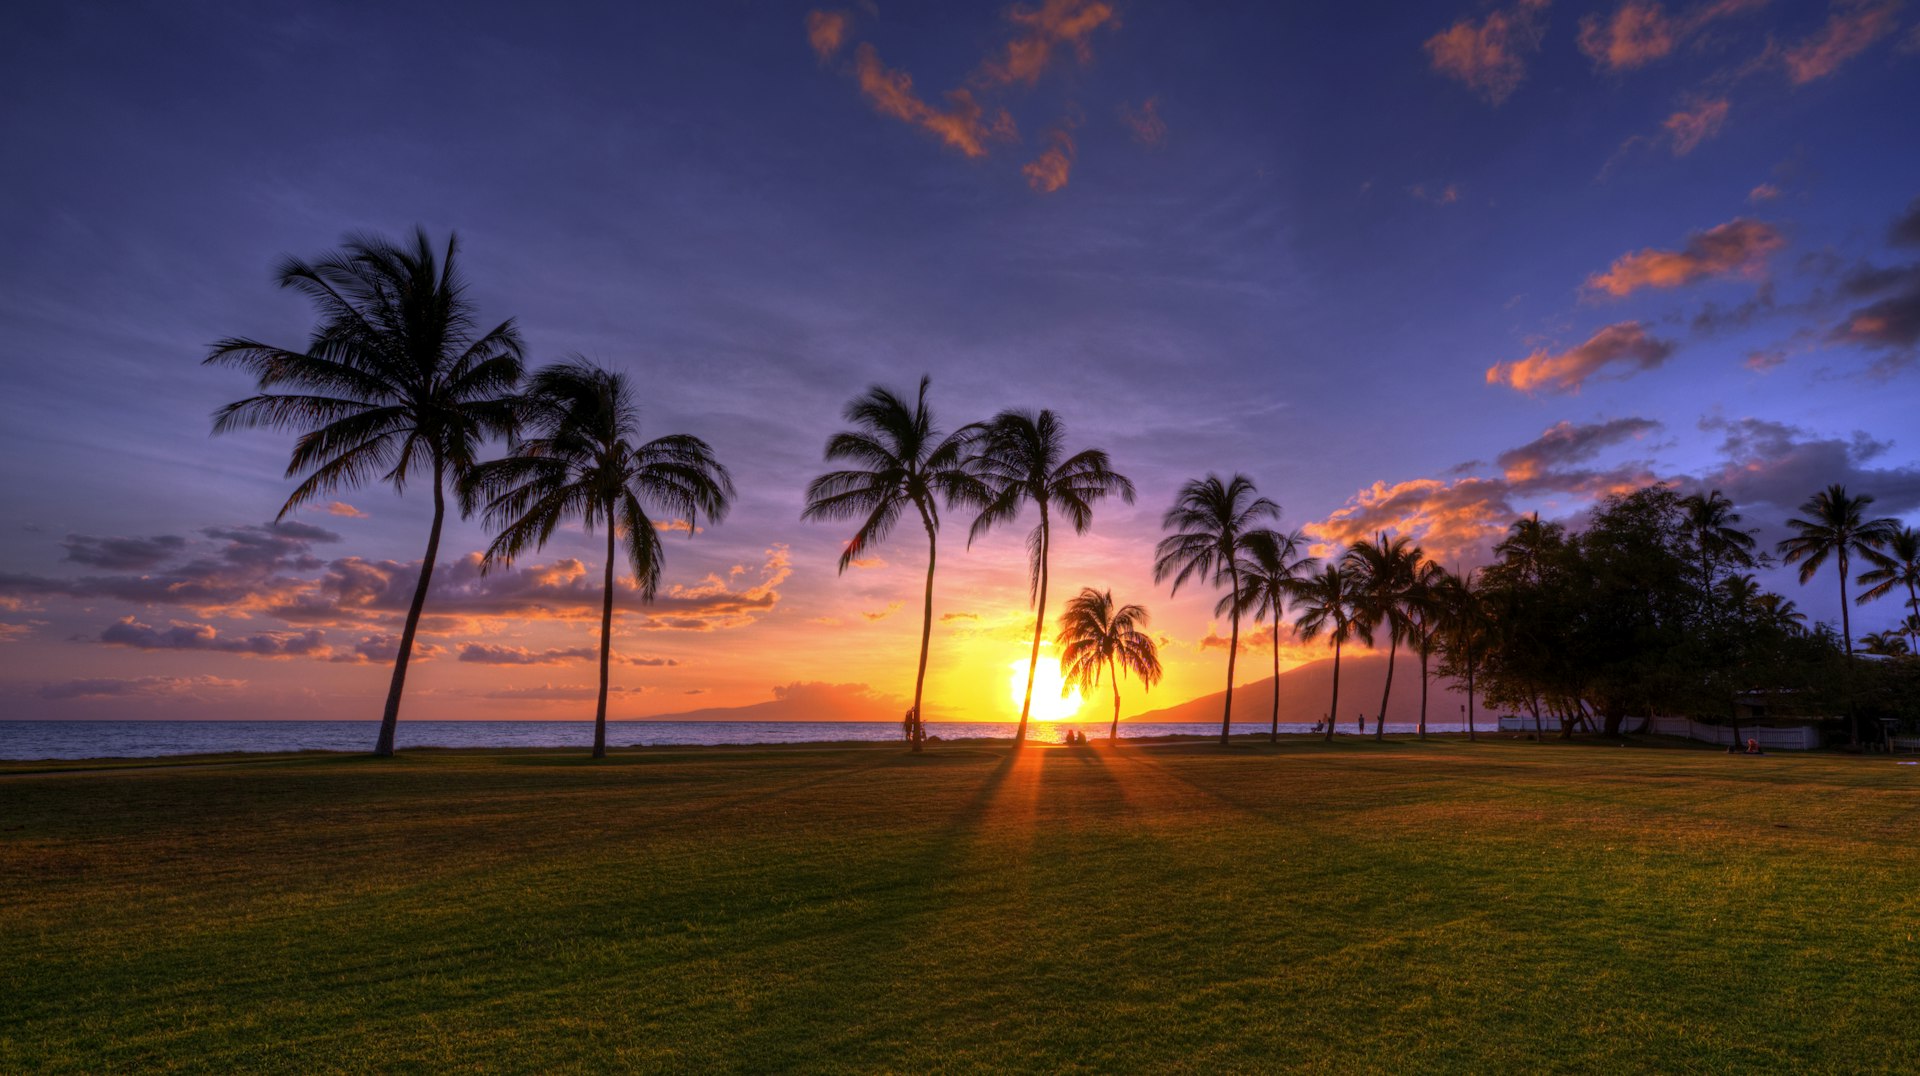 A sunset behind palm trees